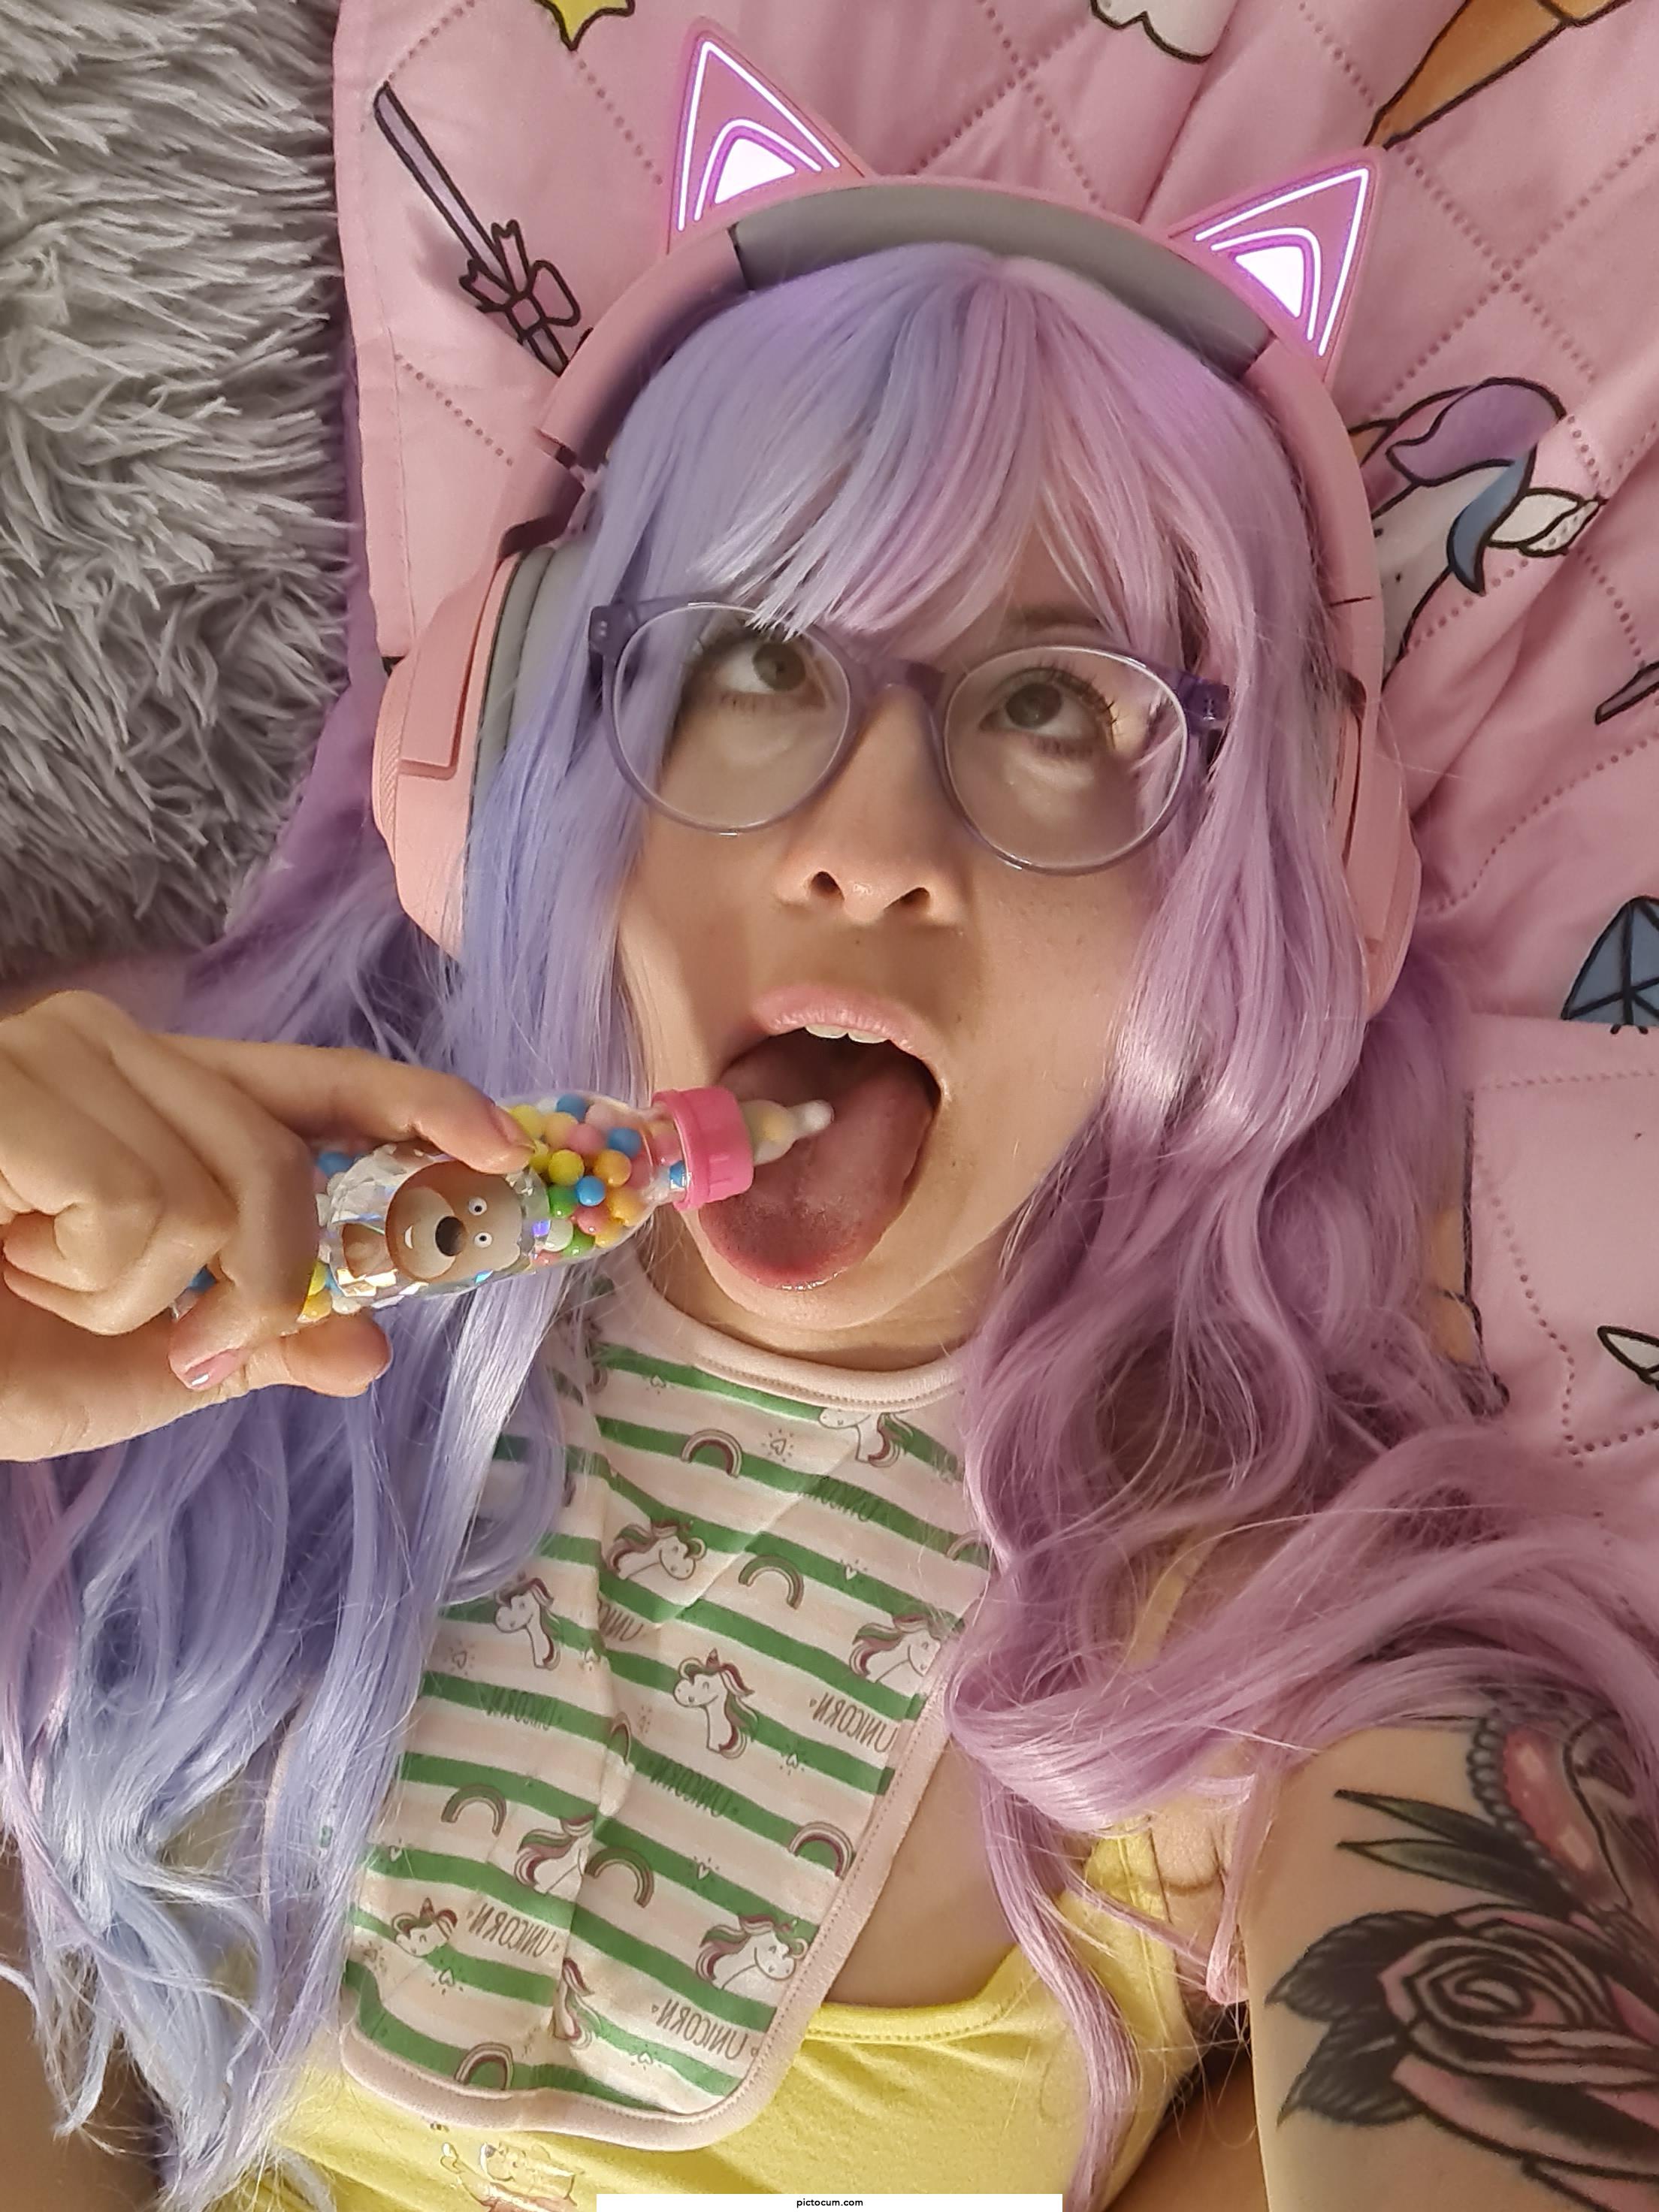 ahegao with my spit blanket